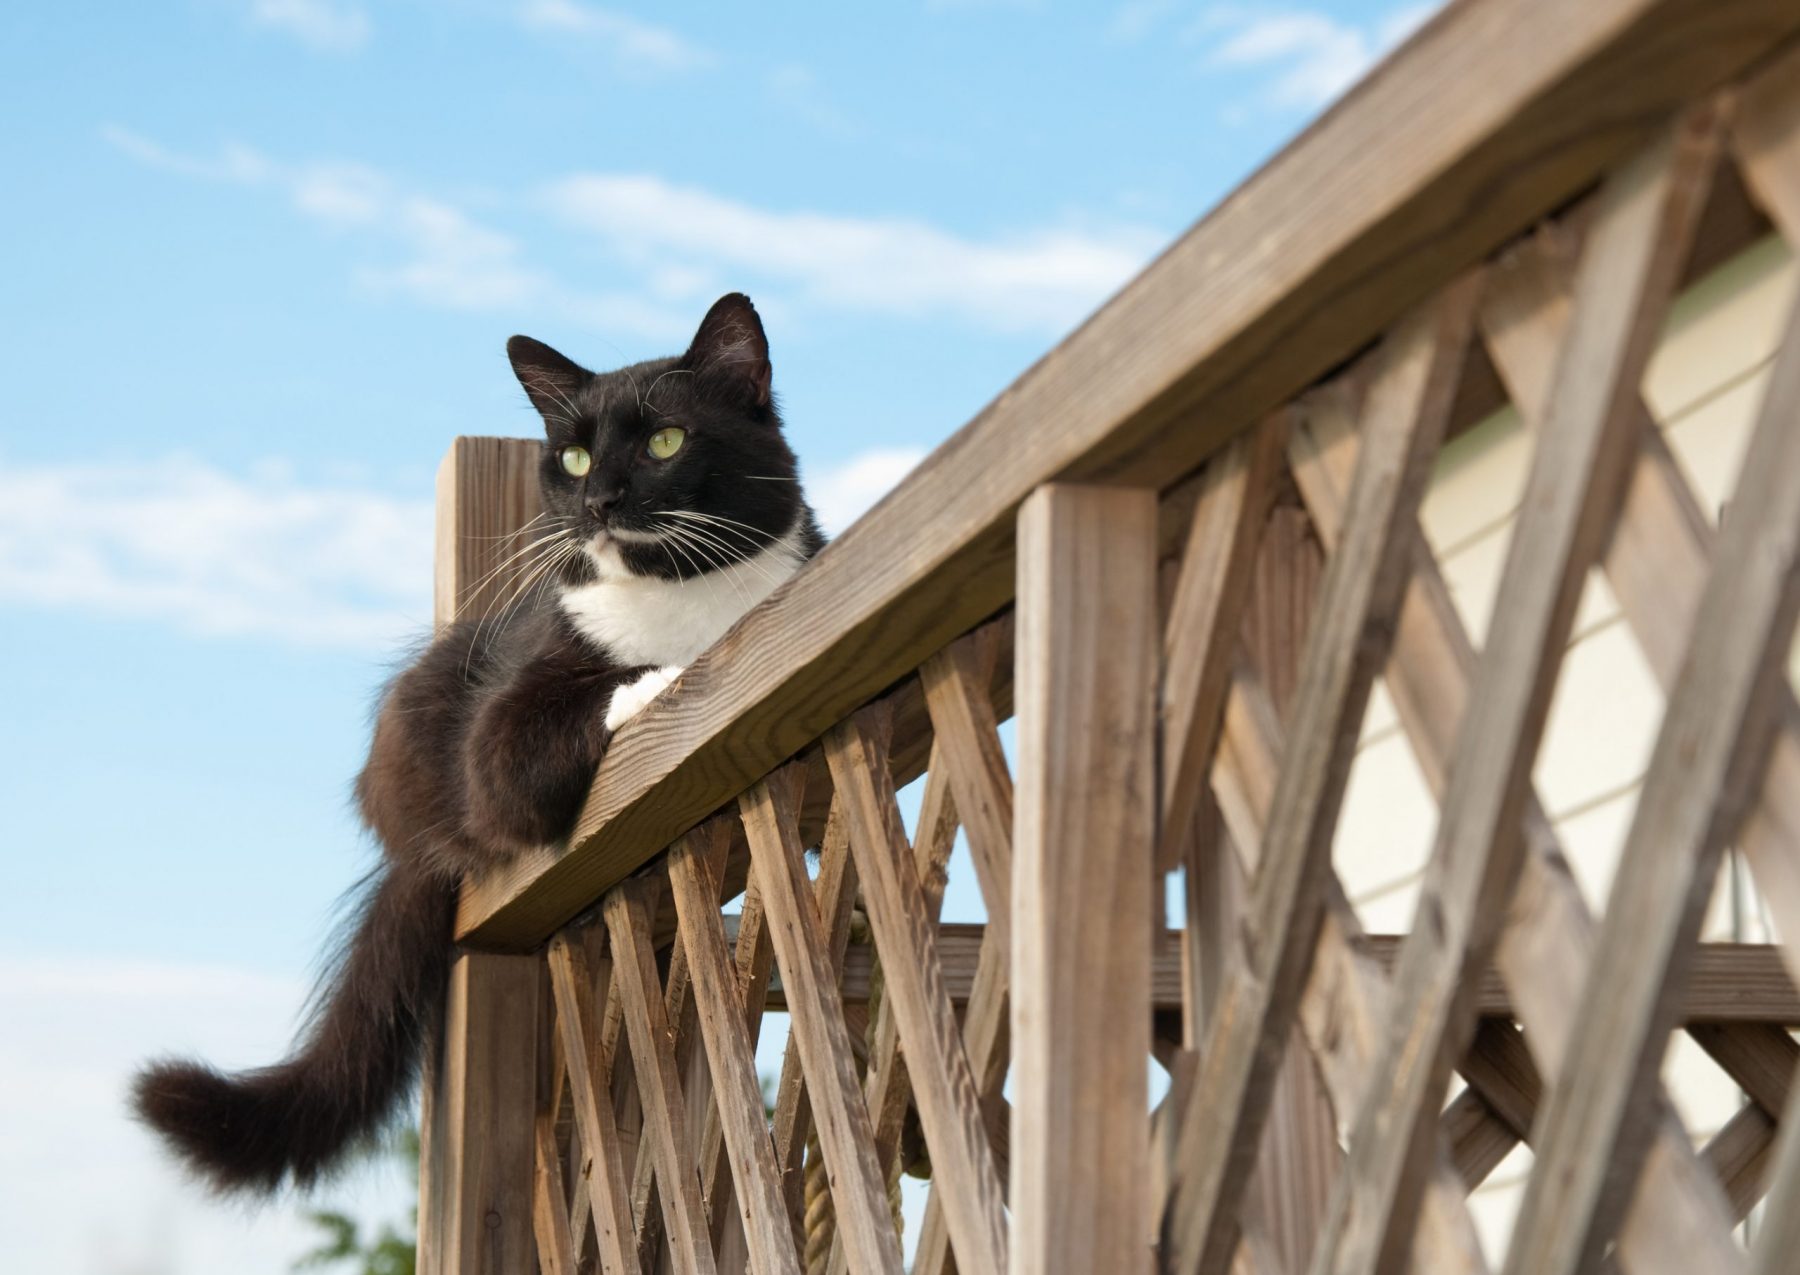 Beautiful black and white tuxedo cat observing on deck railing